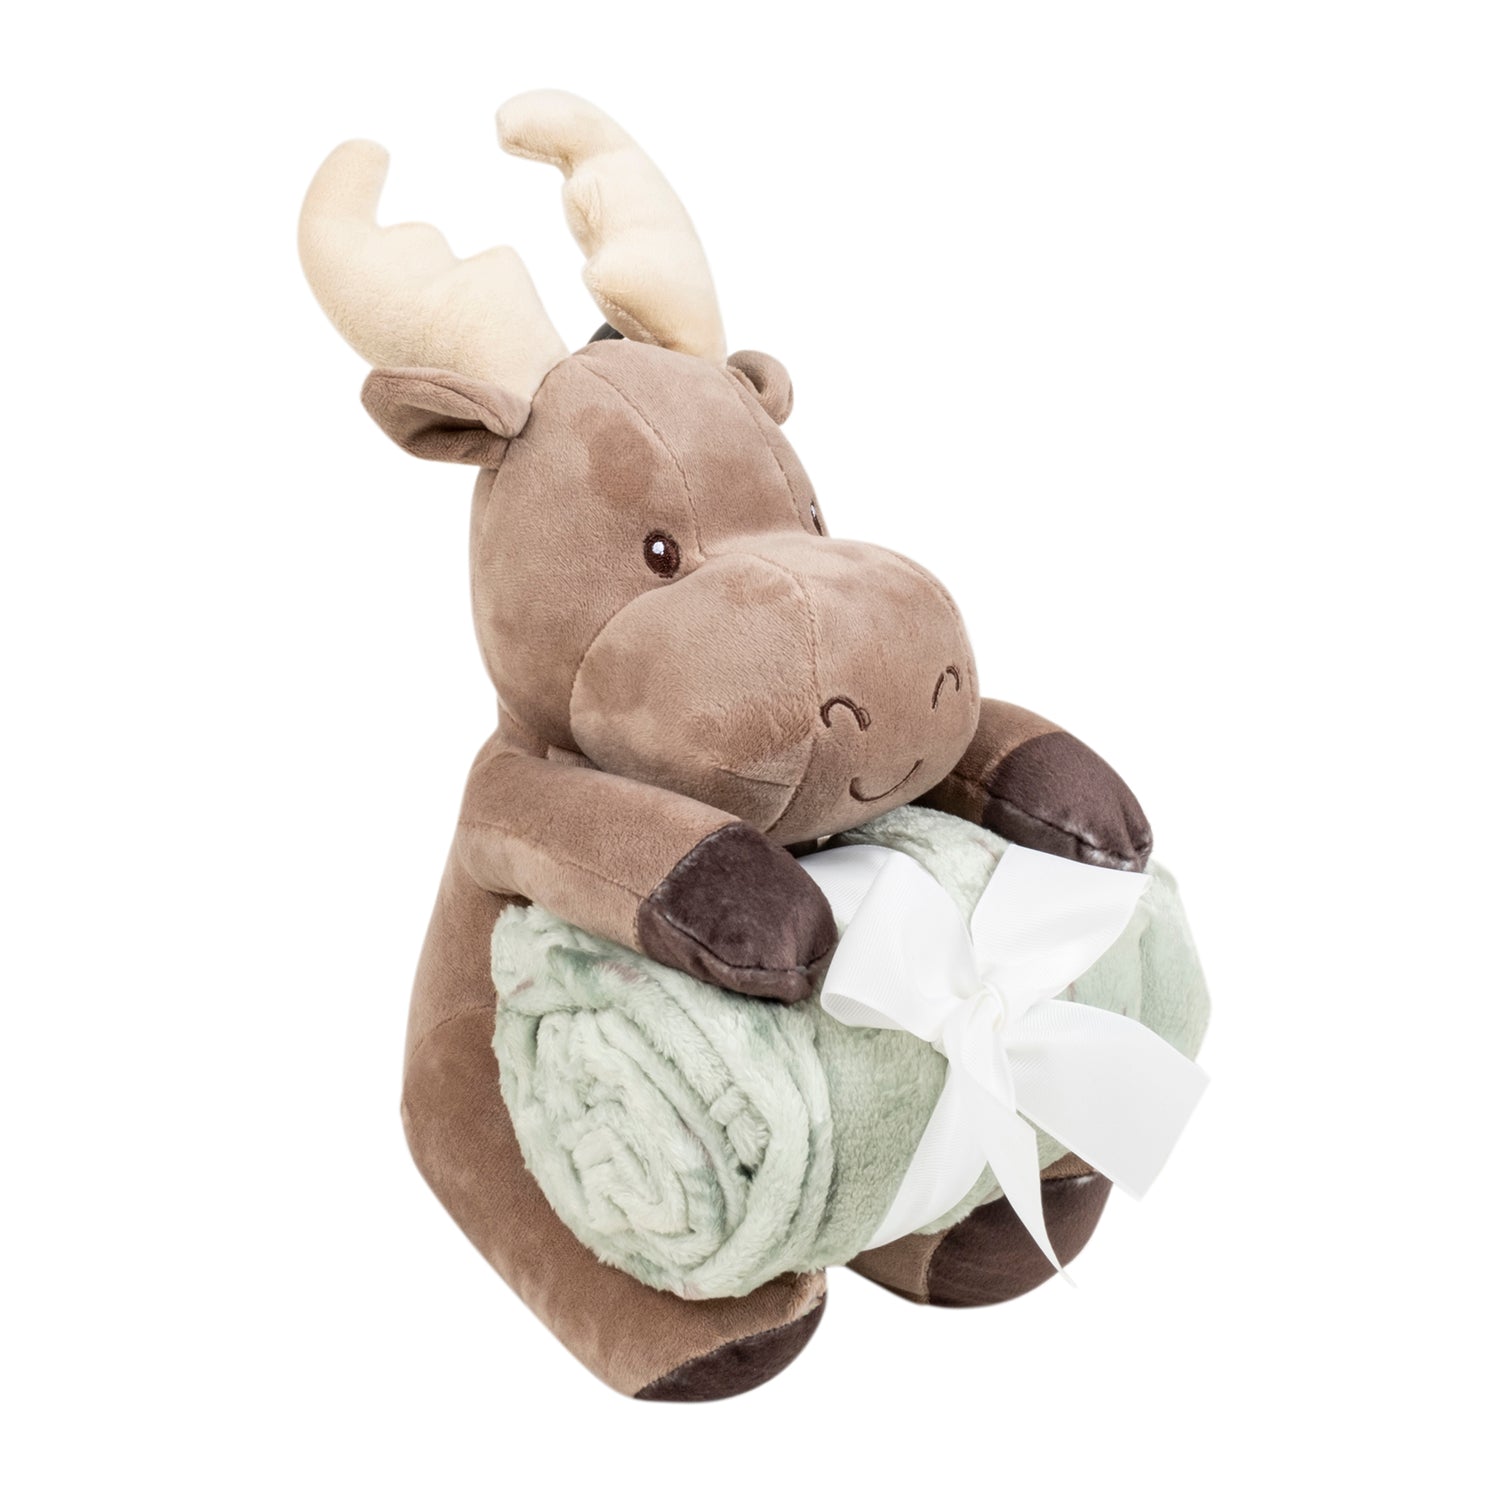 Baby Moo Reindeer Snuggle Buddy Soft Rattle and Plush Blanket Gift Toy Blanket - Brown